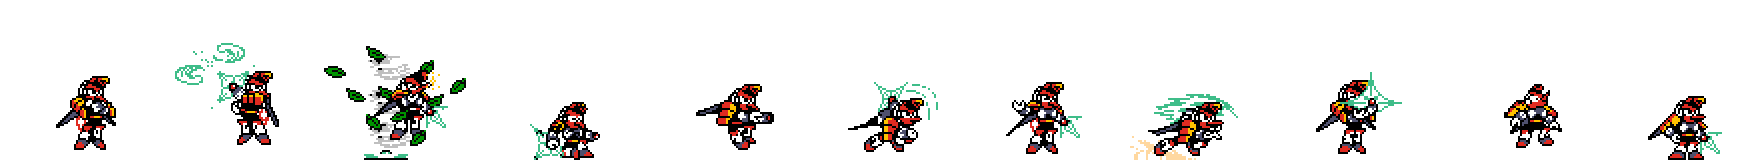 Tengu Man | Base Sprite Right<div style="margin-top: 4px; letting-spacing: 1px; font-size: 90%; font-family: Courier New; color: rgb(159, 150, 172);">[robot:right:base]{tengu-man}</div>